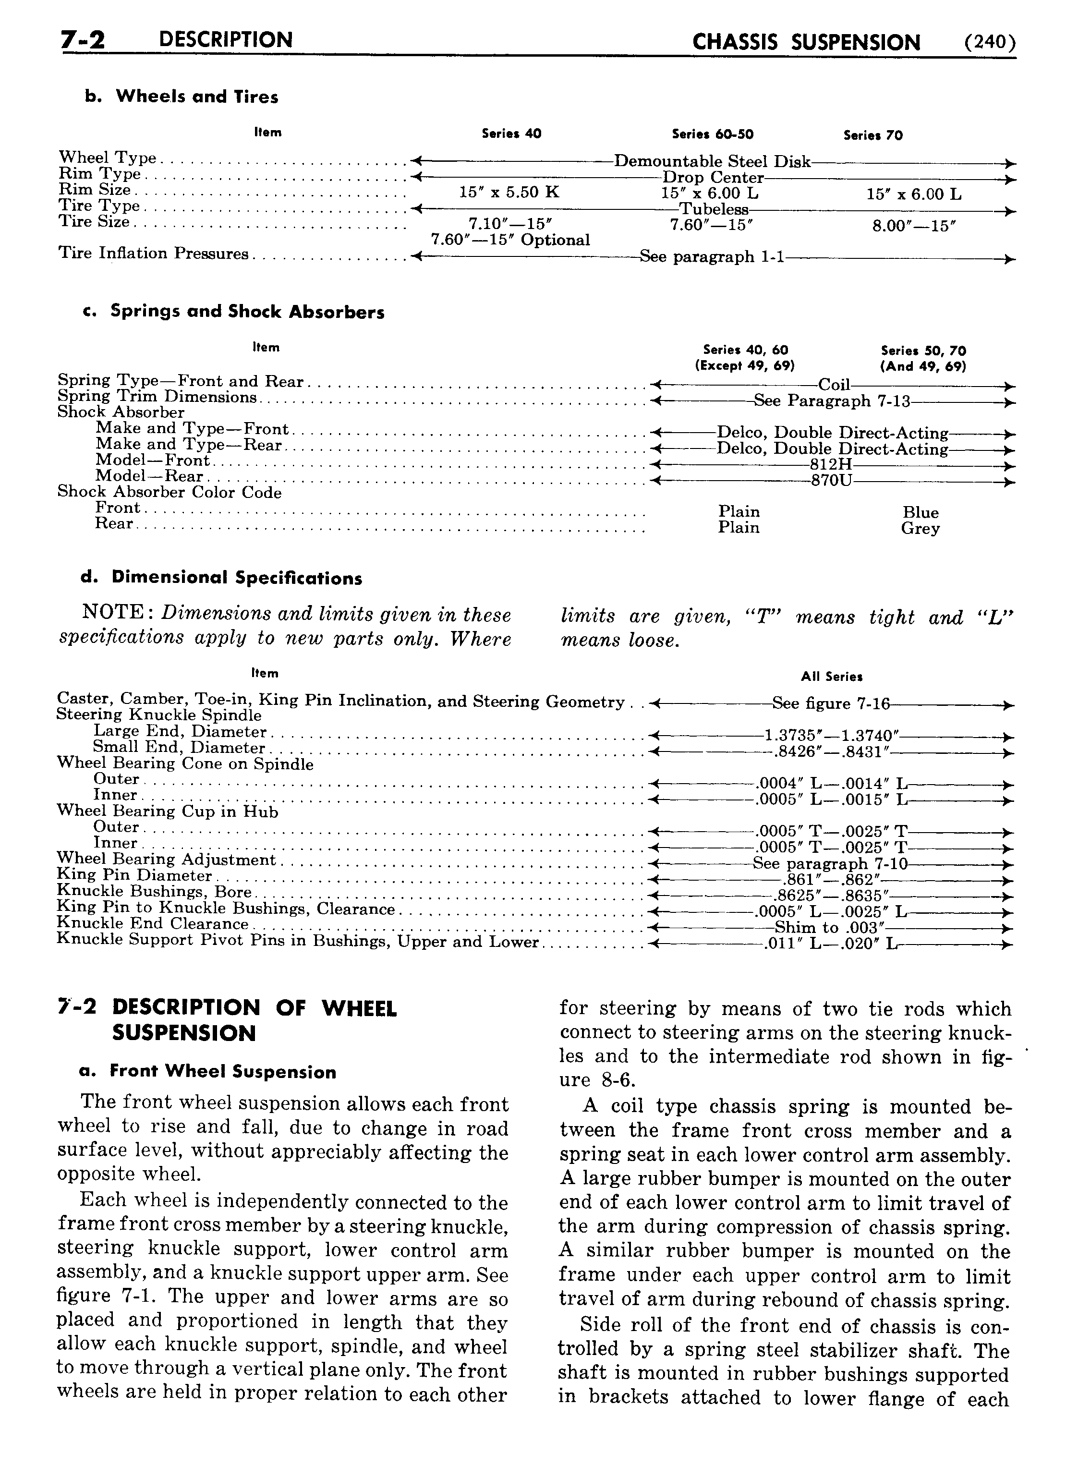 n_08 1956 Buick Shop Manual - Chassis Suspension-002-002.jpg